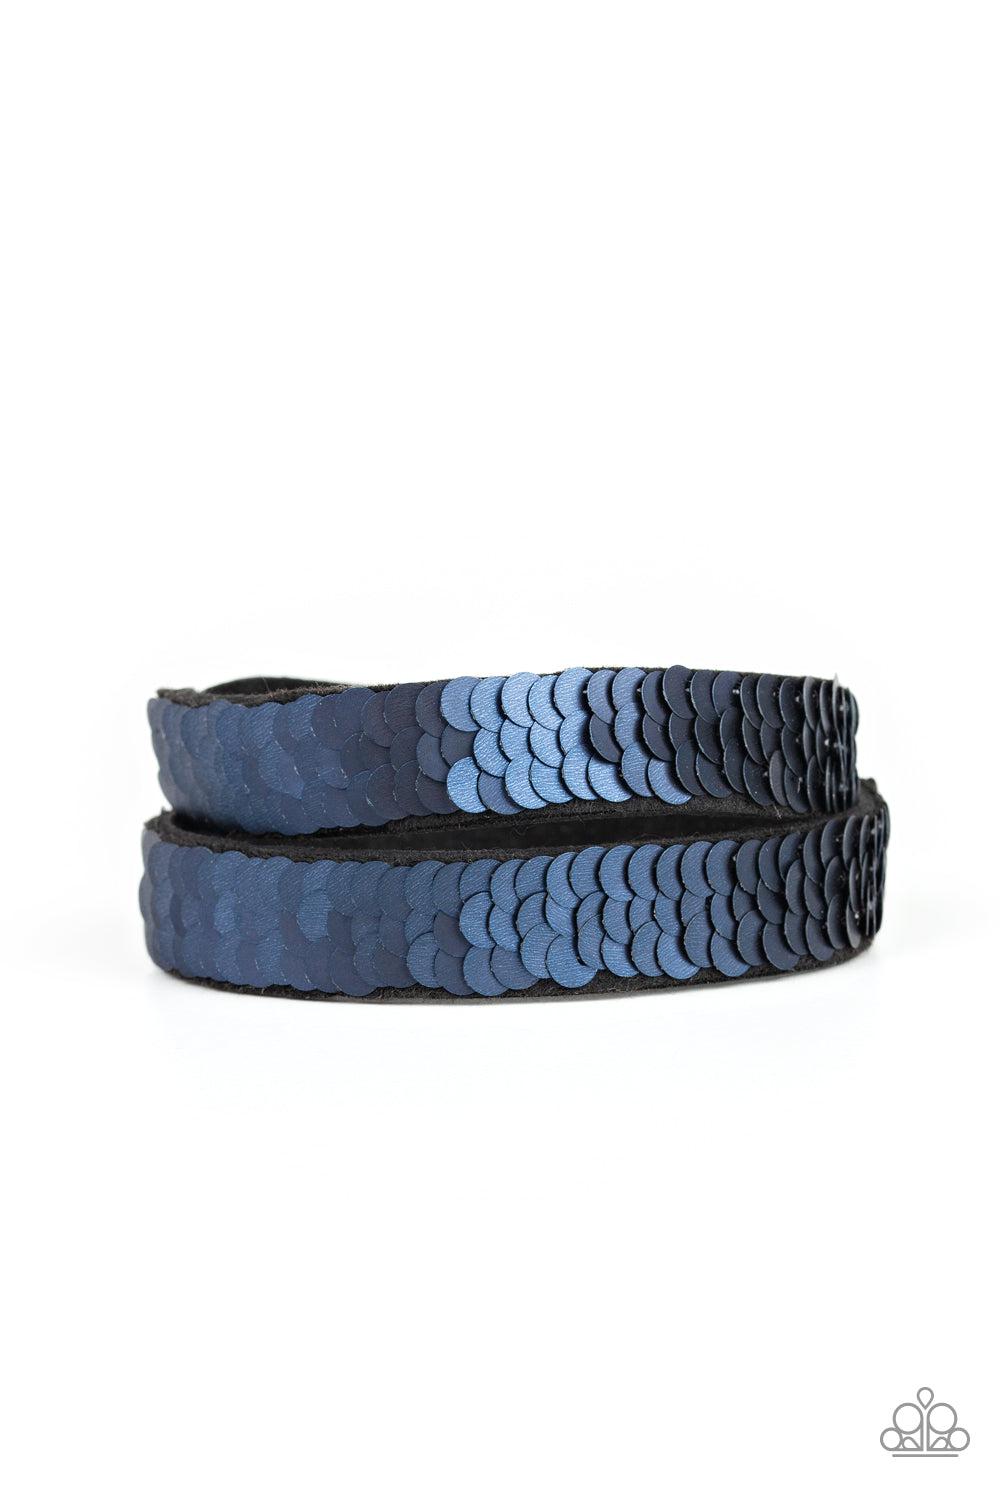 Under The SEQUINS Blue / Silver Double-Wrap Snap Bracelet - Paparazzi Accessories-CarasShop.com - $5 Jewelry by Cara Jewels